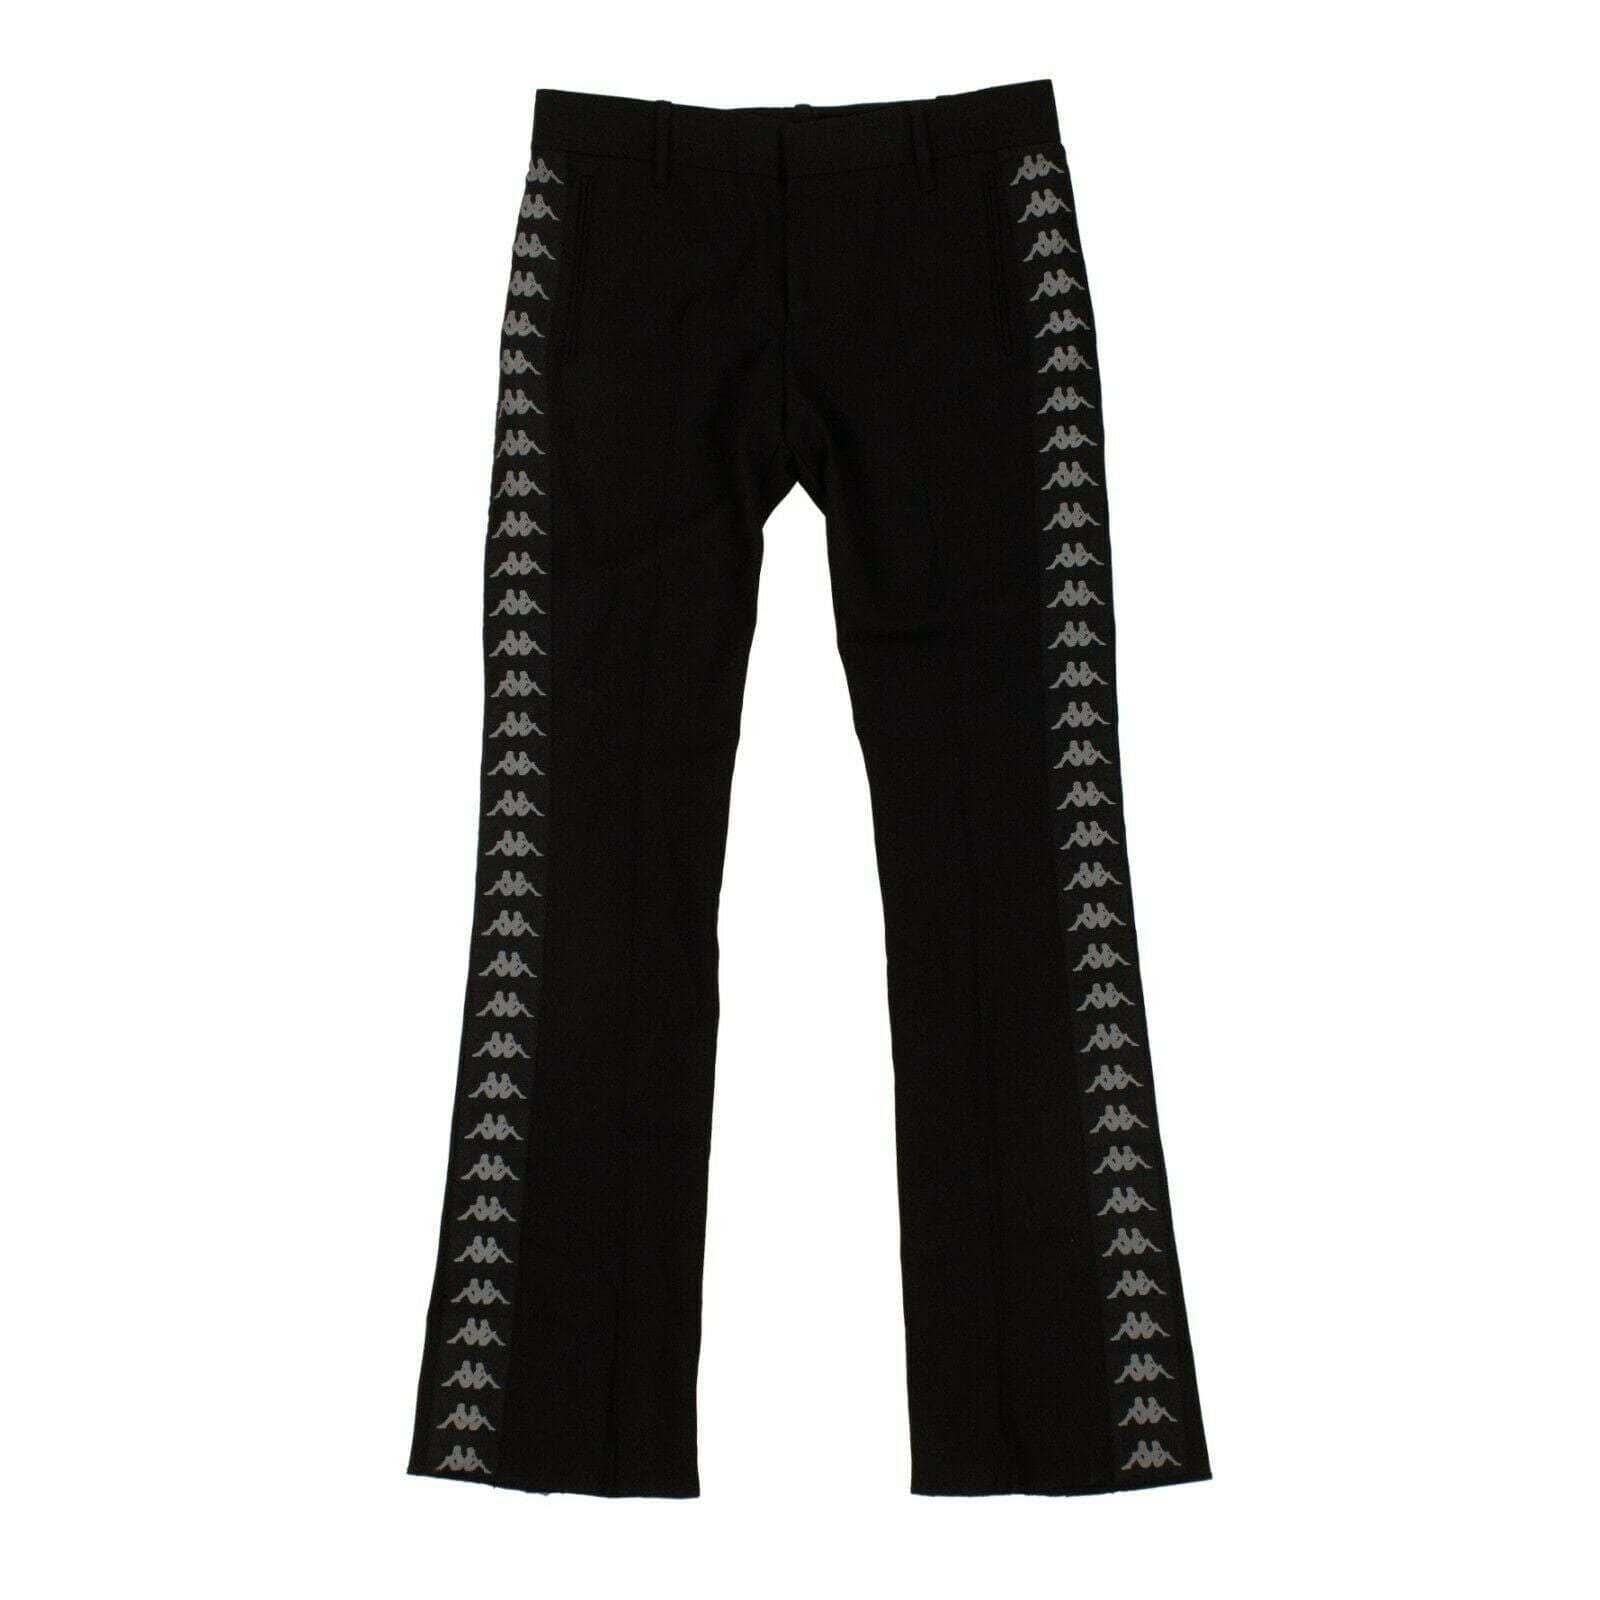 Faith Connexion chicmi, couponcollection, faith-connexion, faith-connexion-x-kappa, gender-womens, main-clothing, size-6, under-250, womens-straight-pants 6 Women's Black And Gray Trumpette Pants 69LE-1706/6 69LE-1706/6